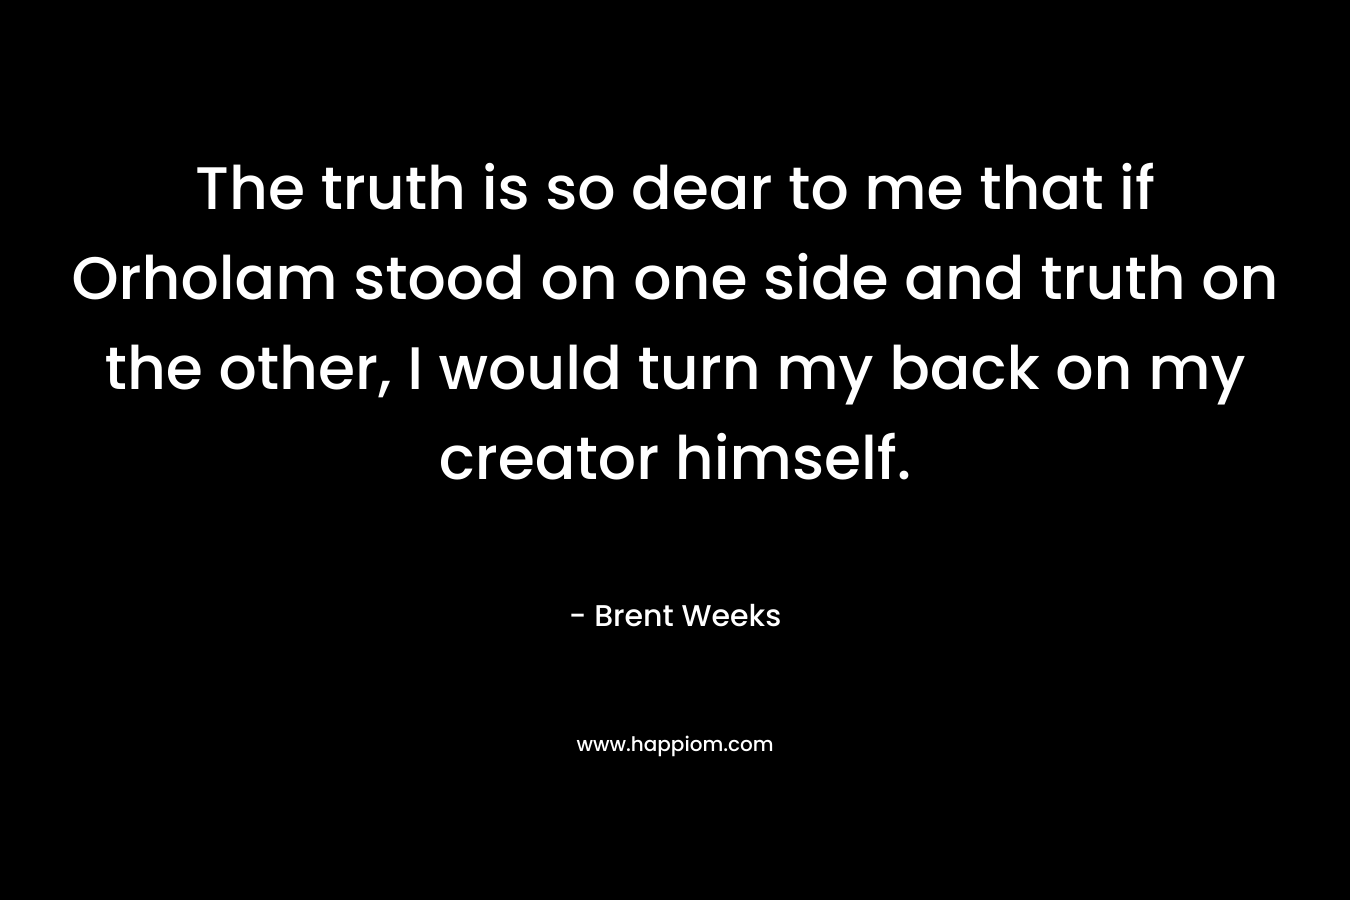 The truth is so dear to me that if Orholam stood on one side and truth on the other, I would turn my back on my creator himself. – Brent Weeks